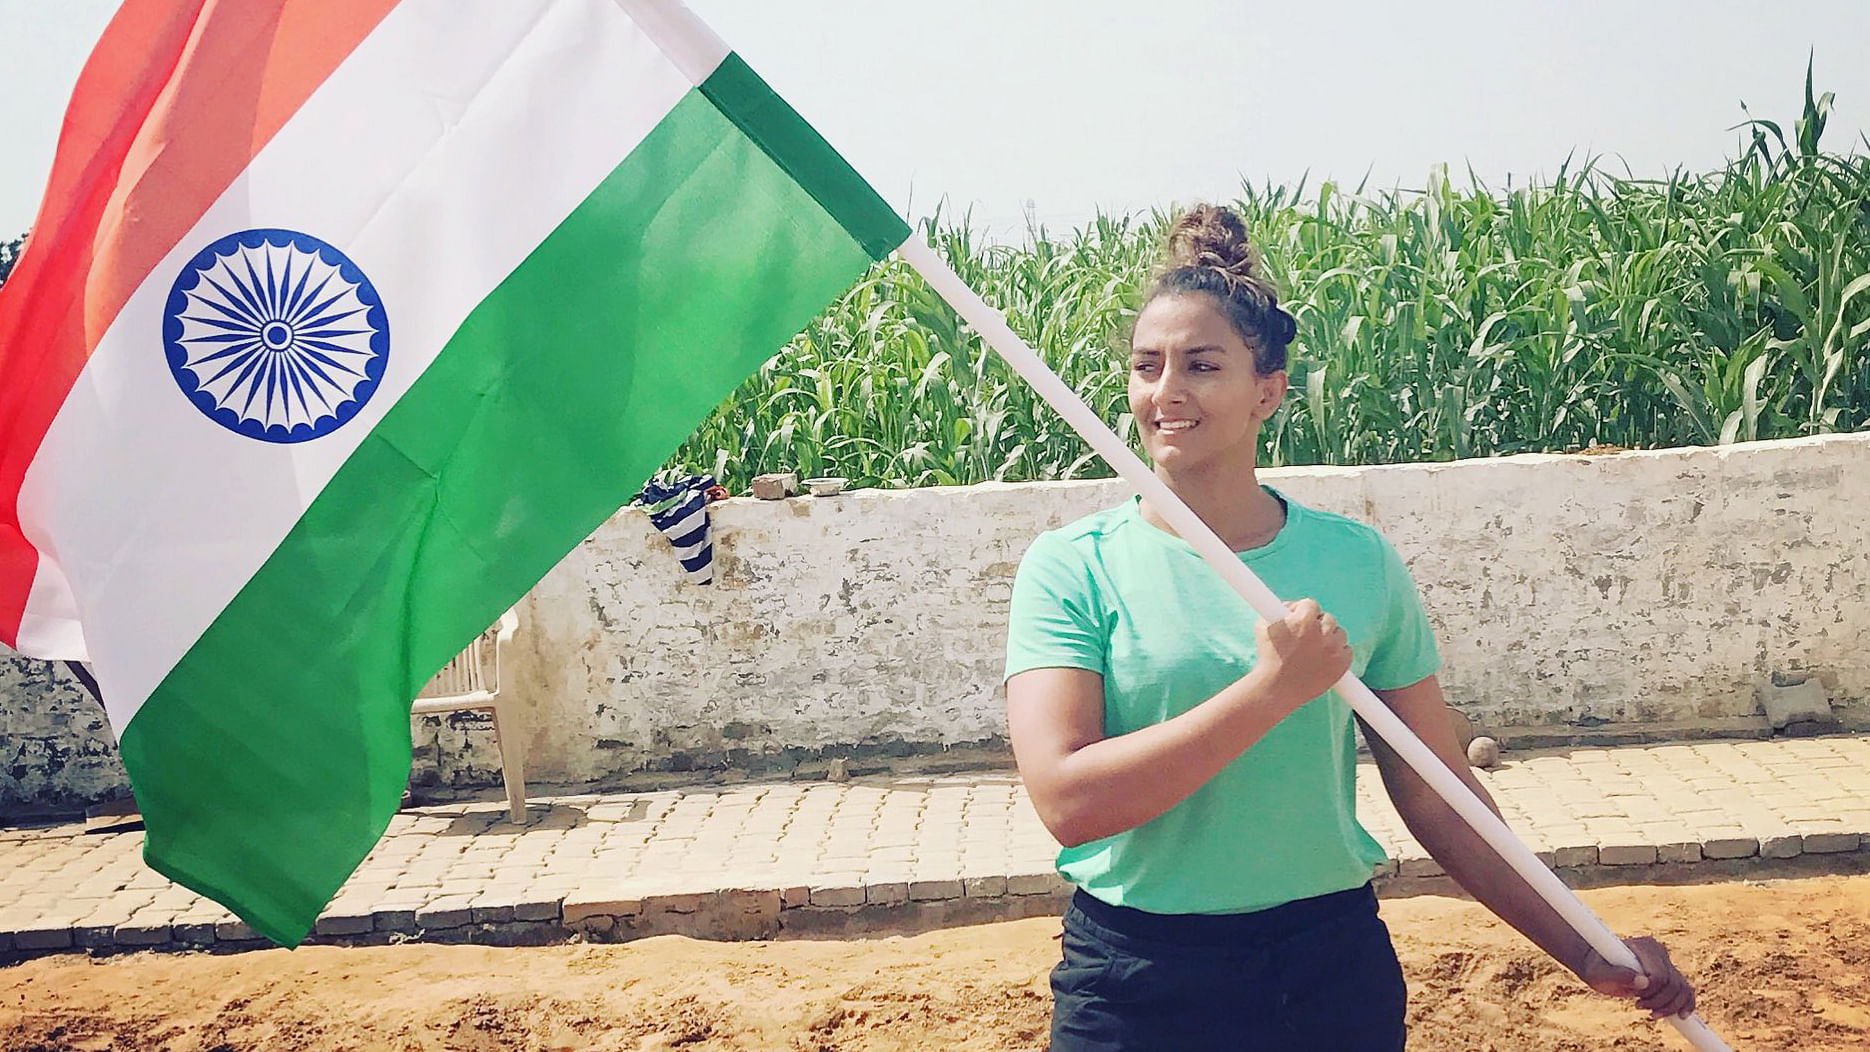 Geeta Phogat said she is nursing an injury and therefore could not reach the camp in time.